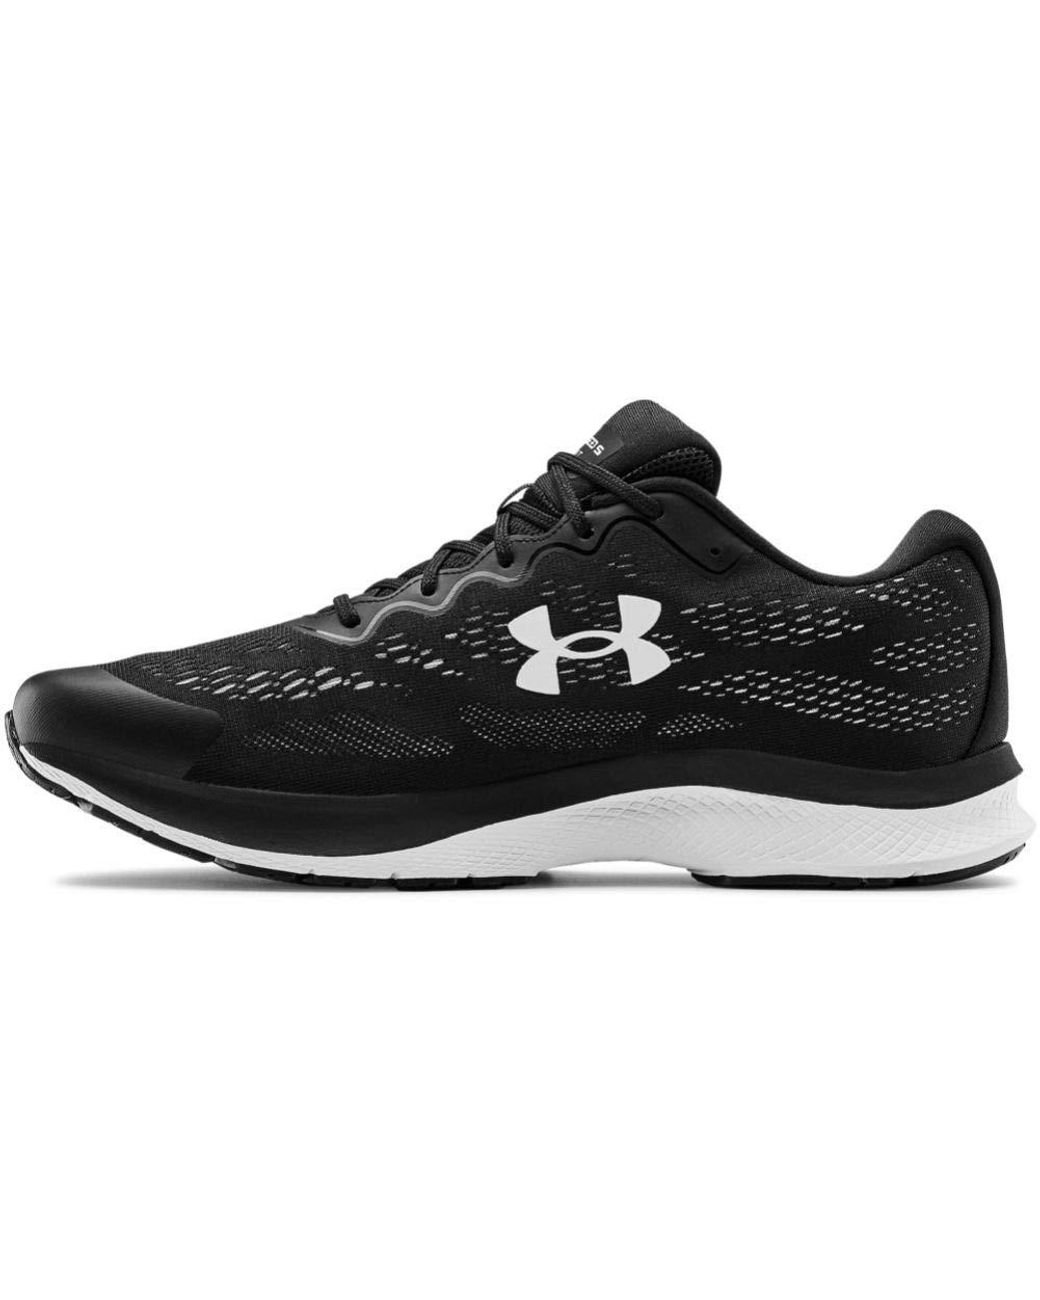 Under Armour Charged Bandit 6 Running Shoe in Black/White (Black) for ...